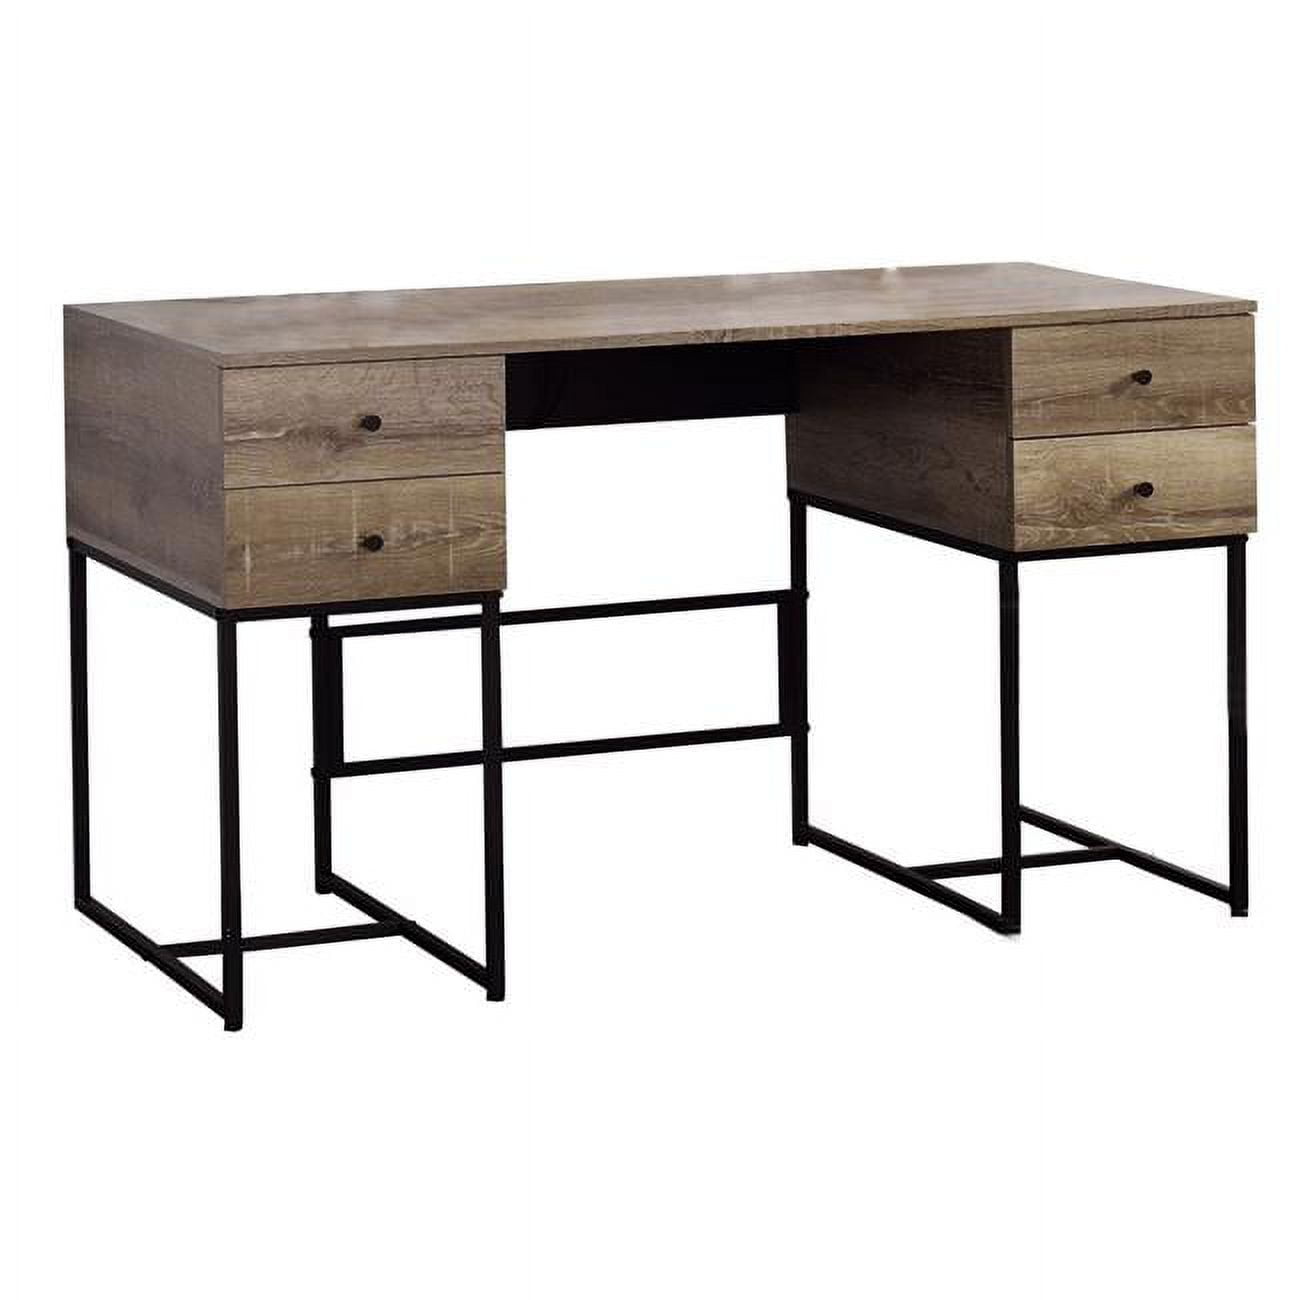 Bm209603 31 X 22 X 47 In. Wooden Desk With 4 Drawers & Tubular Metal Support, Brown & Black